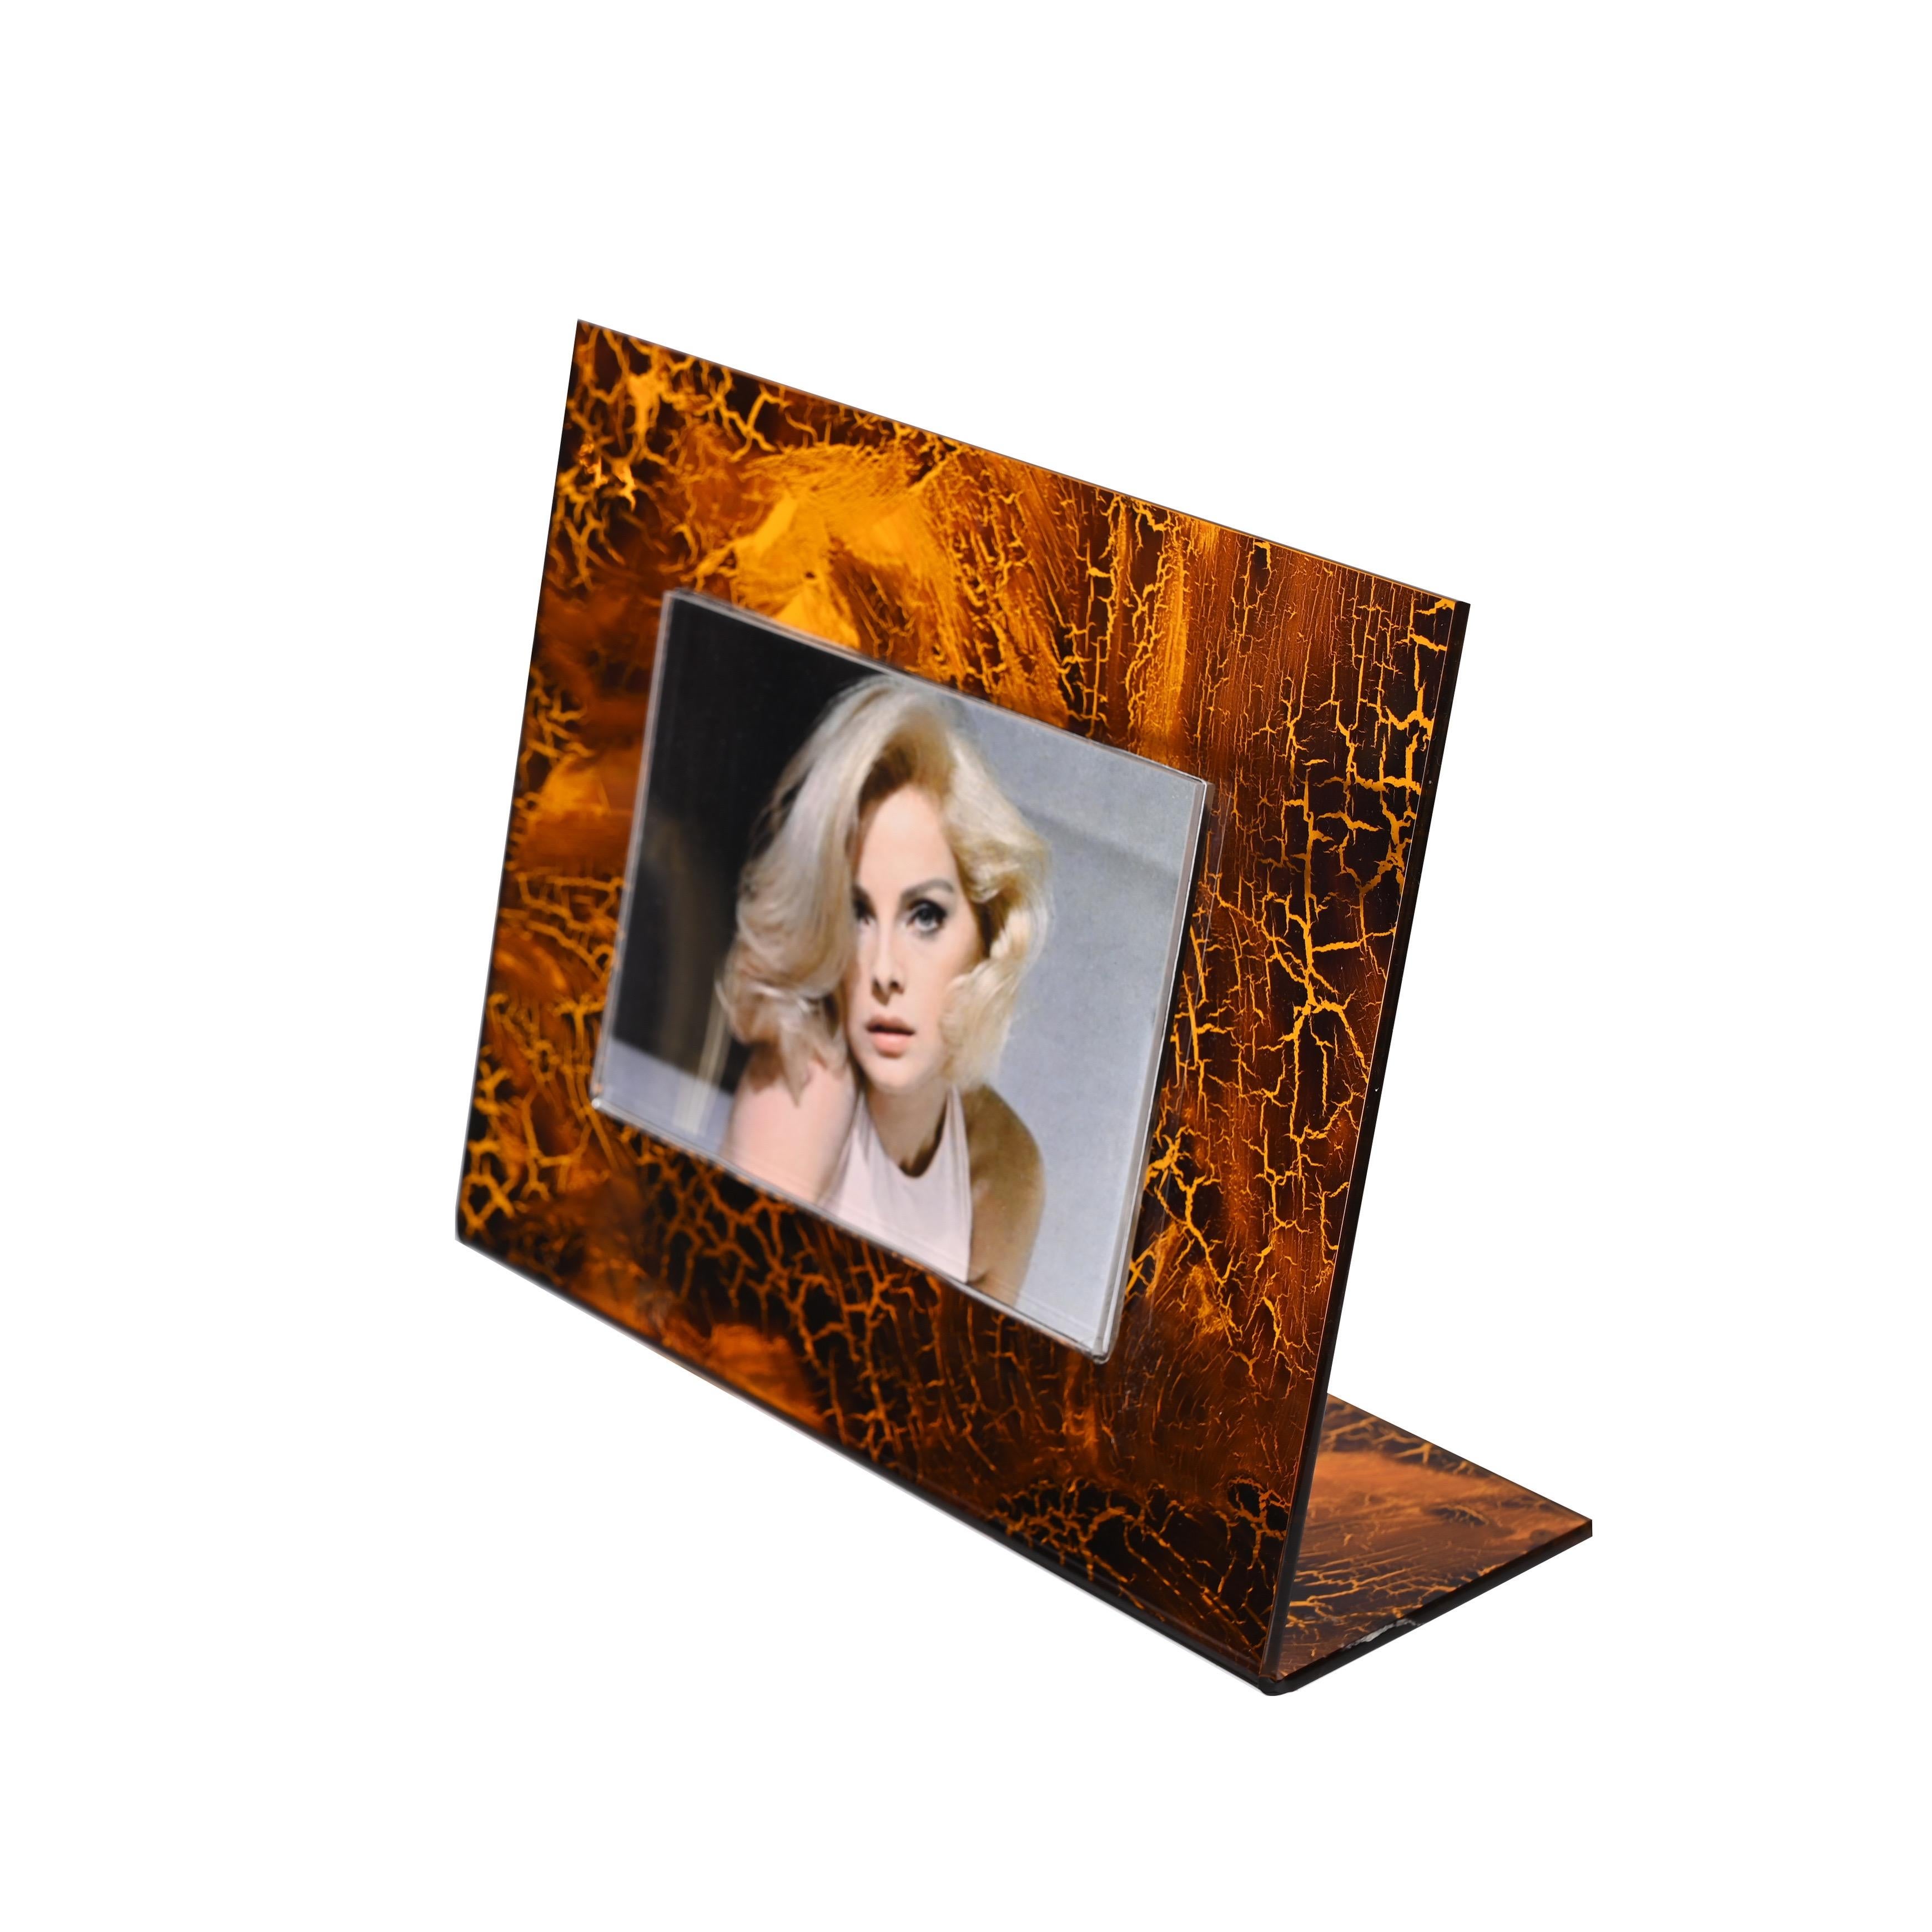 Gabriella Crespi Style Photo Frame in Lucite Tortoiseshell, Italy, 1970s For Sale 3